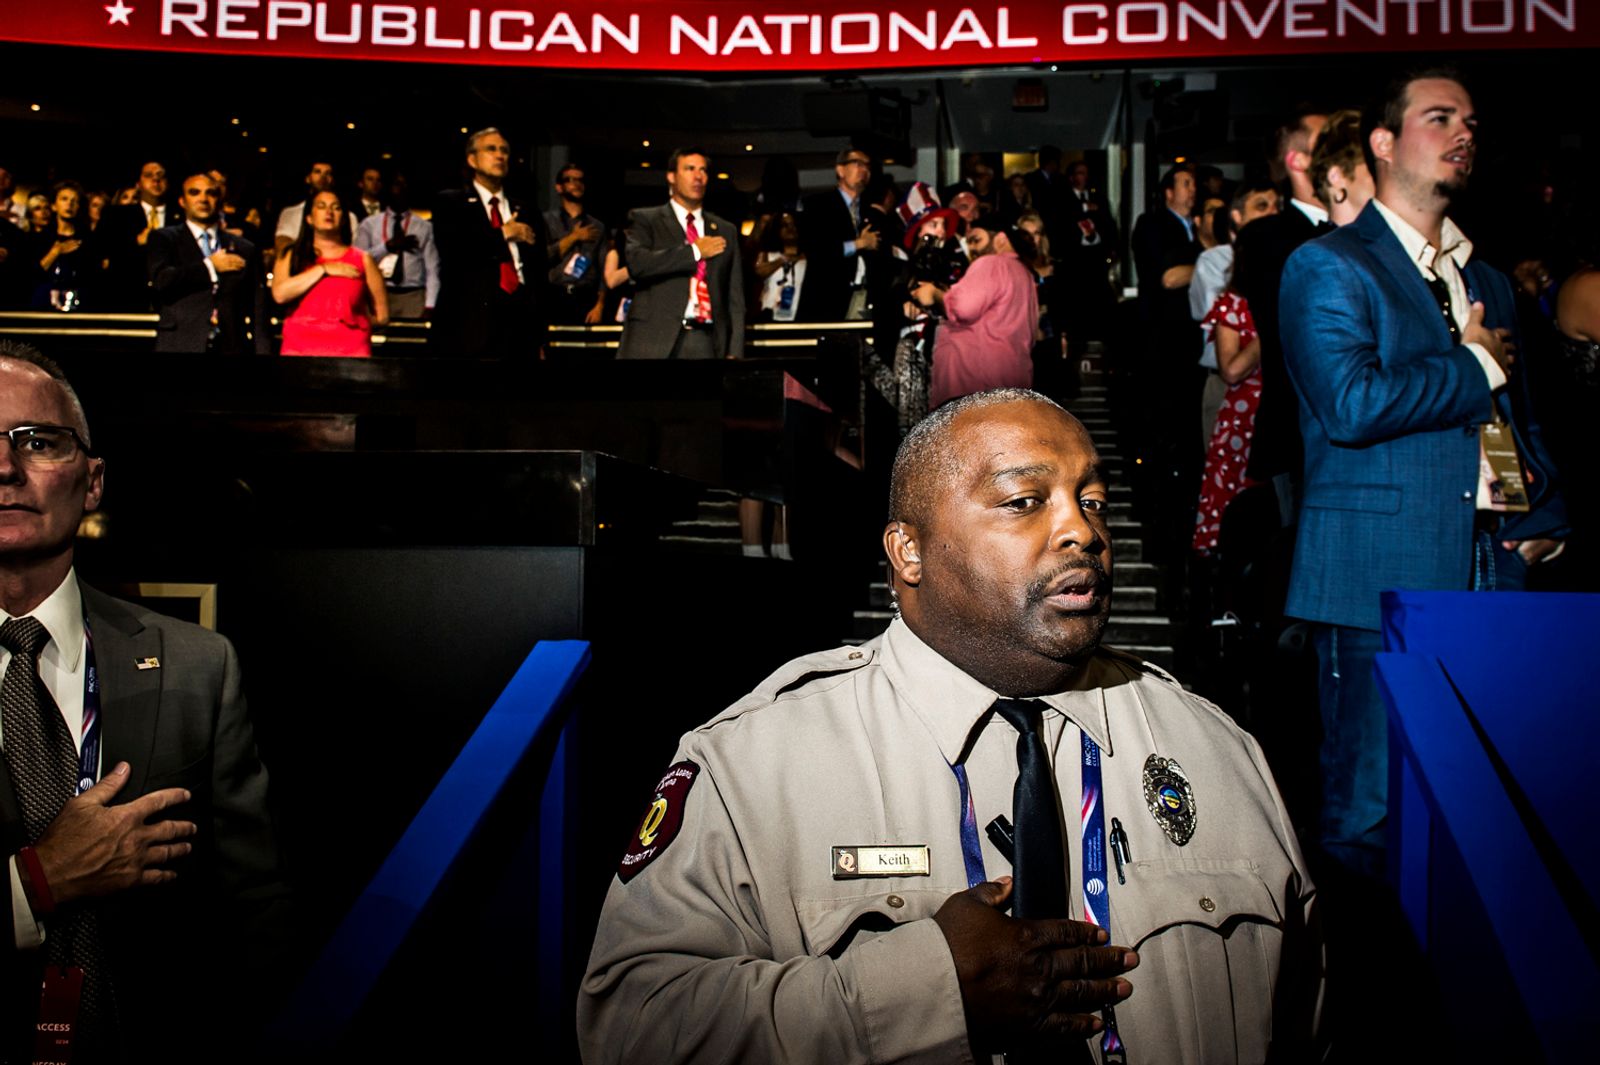 © Dina Litovsky - Image from the Republican National Convention photography project